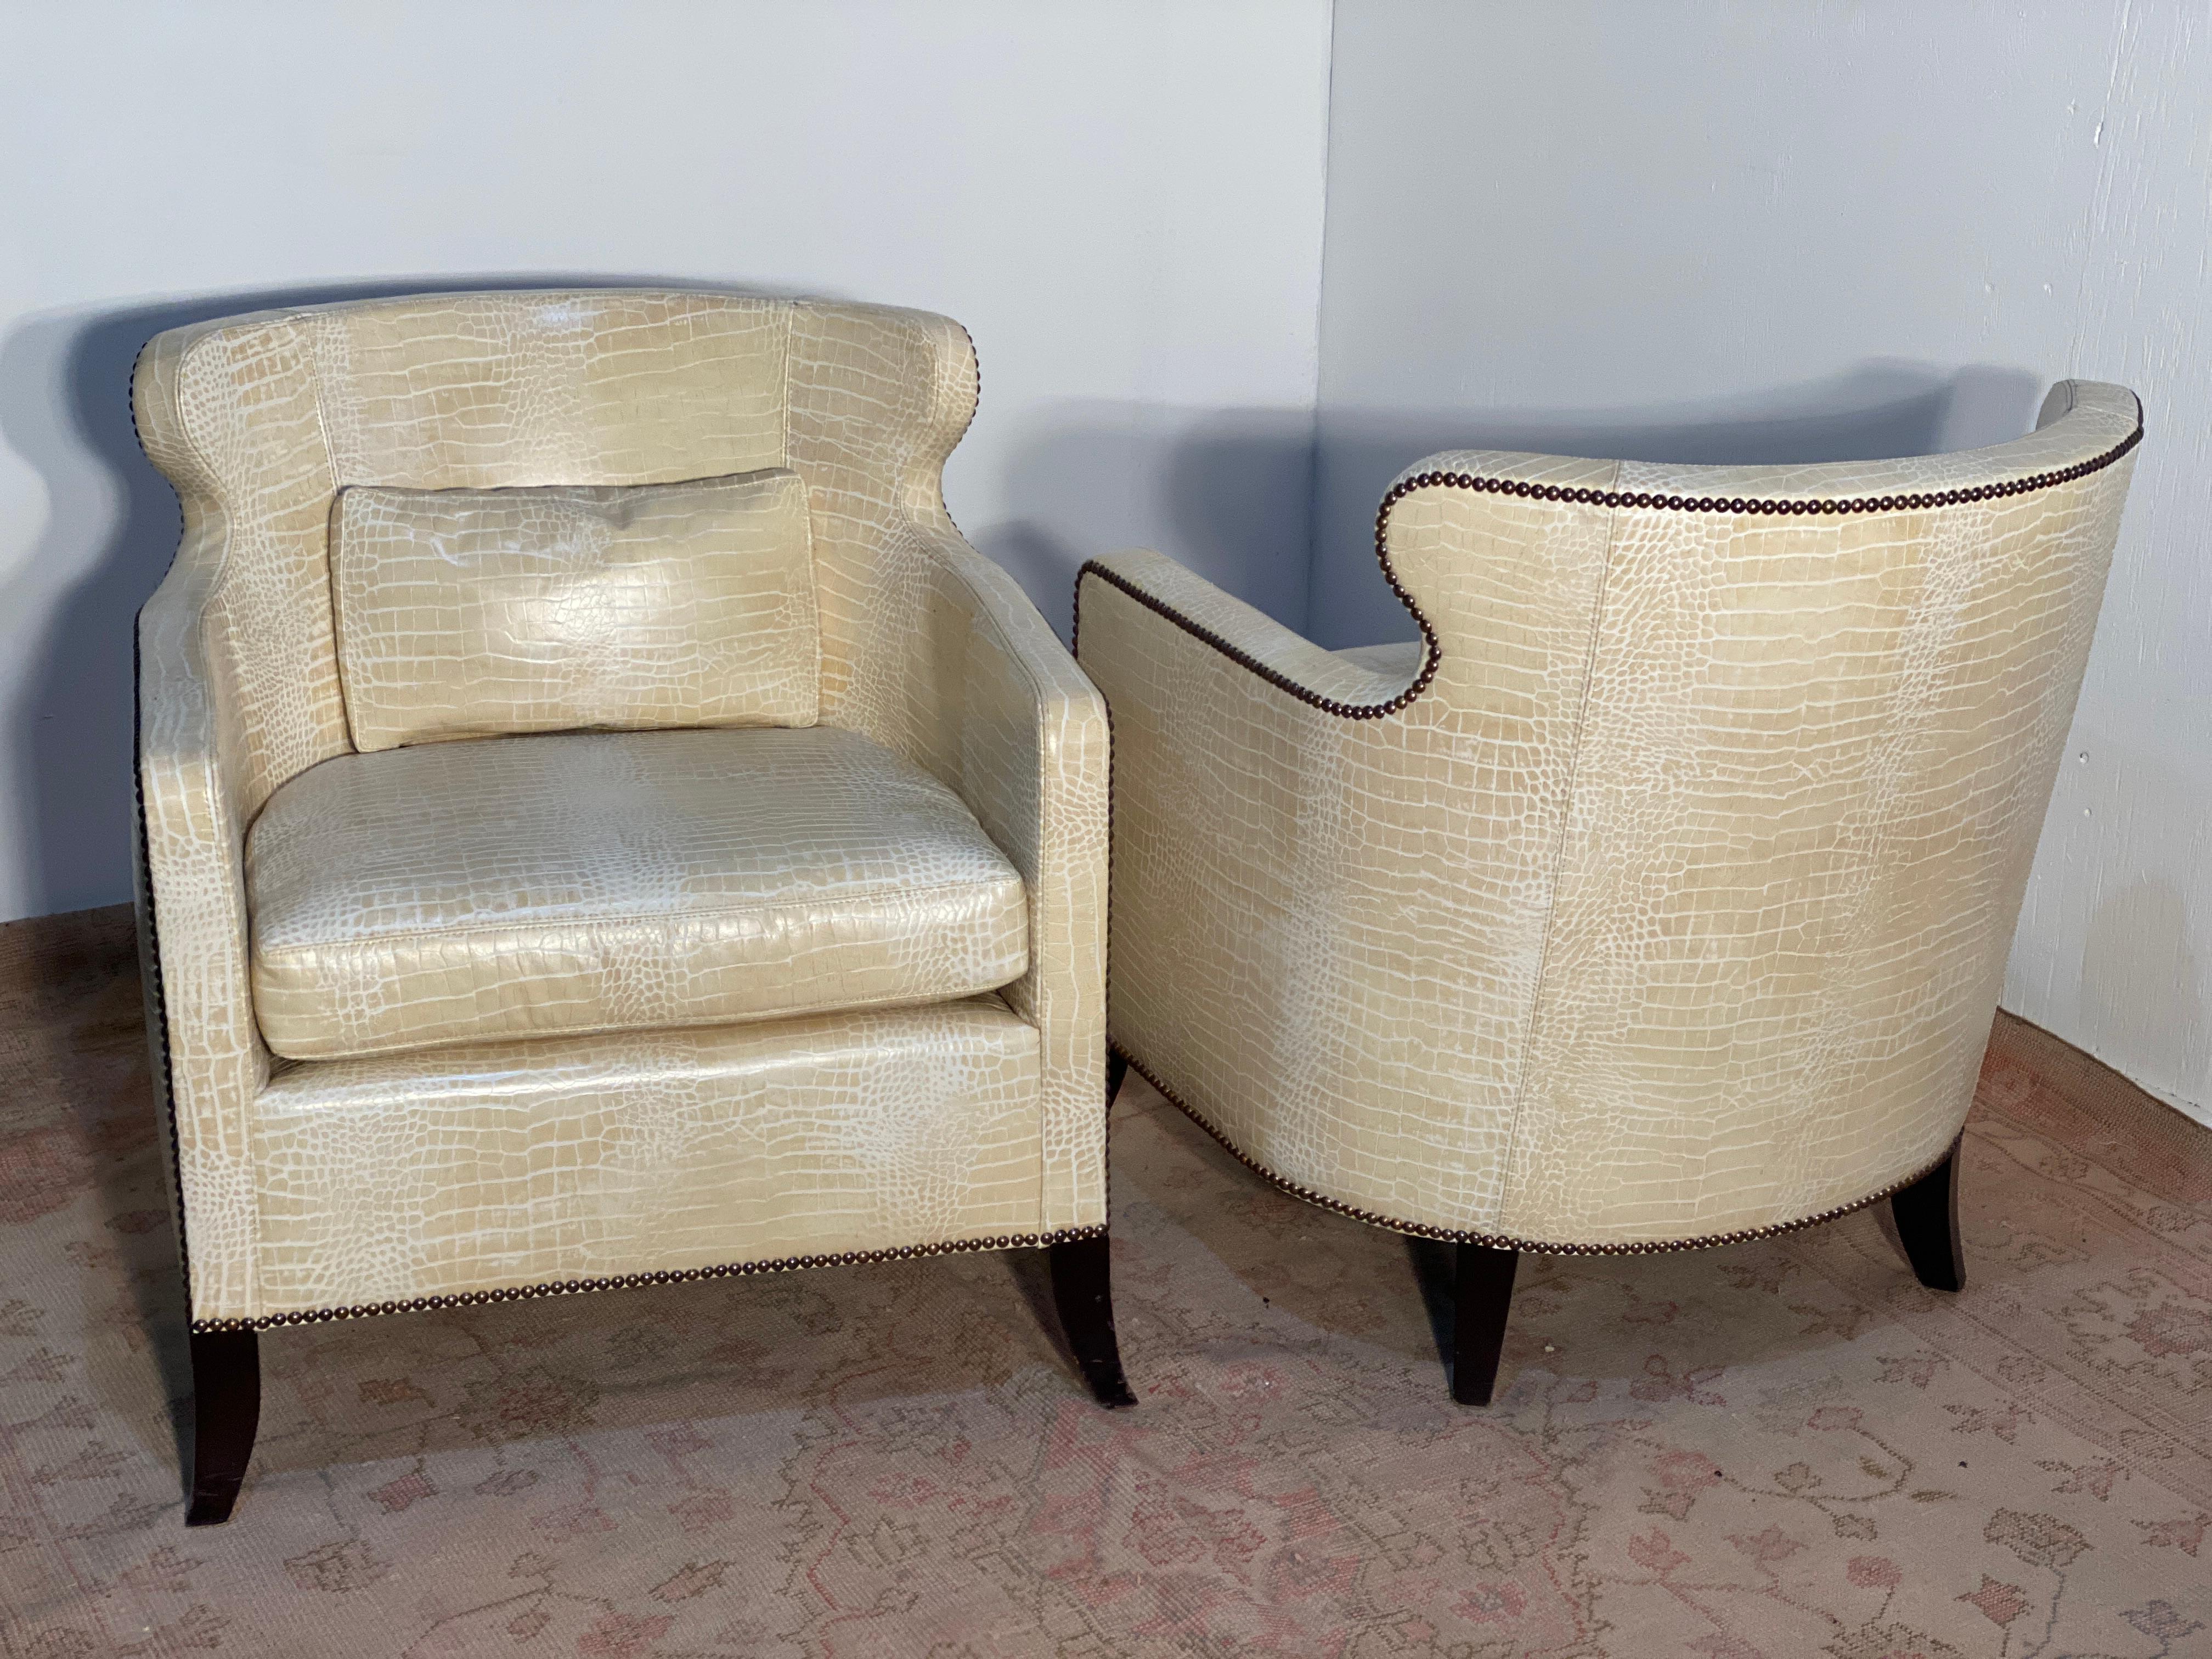 This pair of chairs is fairly new, leather is in almost perfect condition. The chairs have not been used
much at all. The style and design speak for themselves. 
A concierge service delivery within California can be arranged.